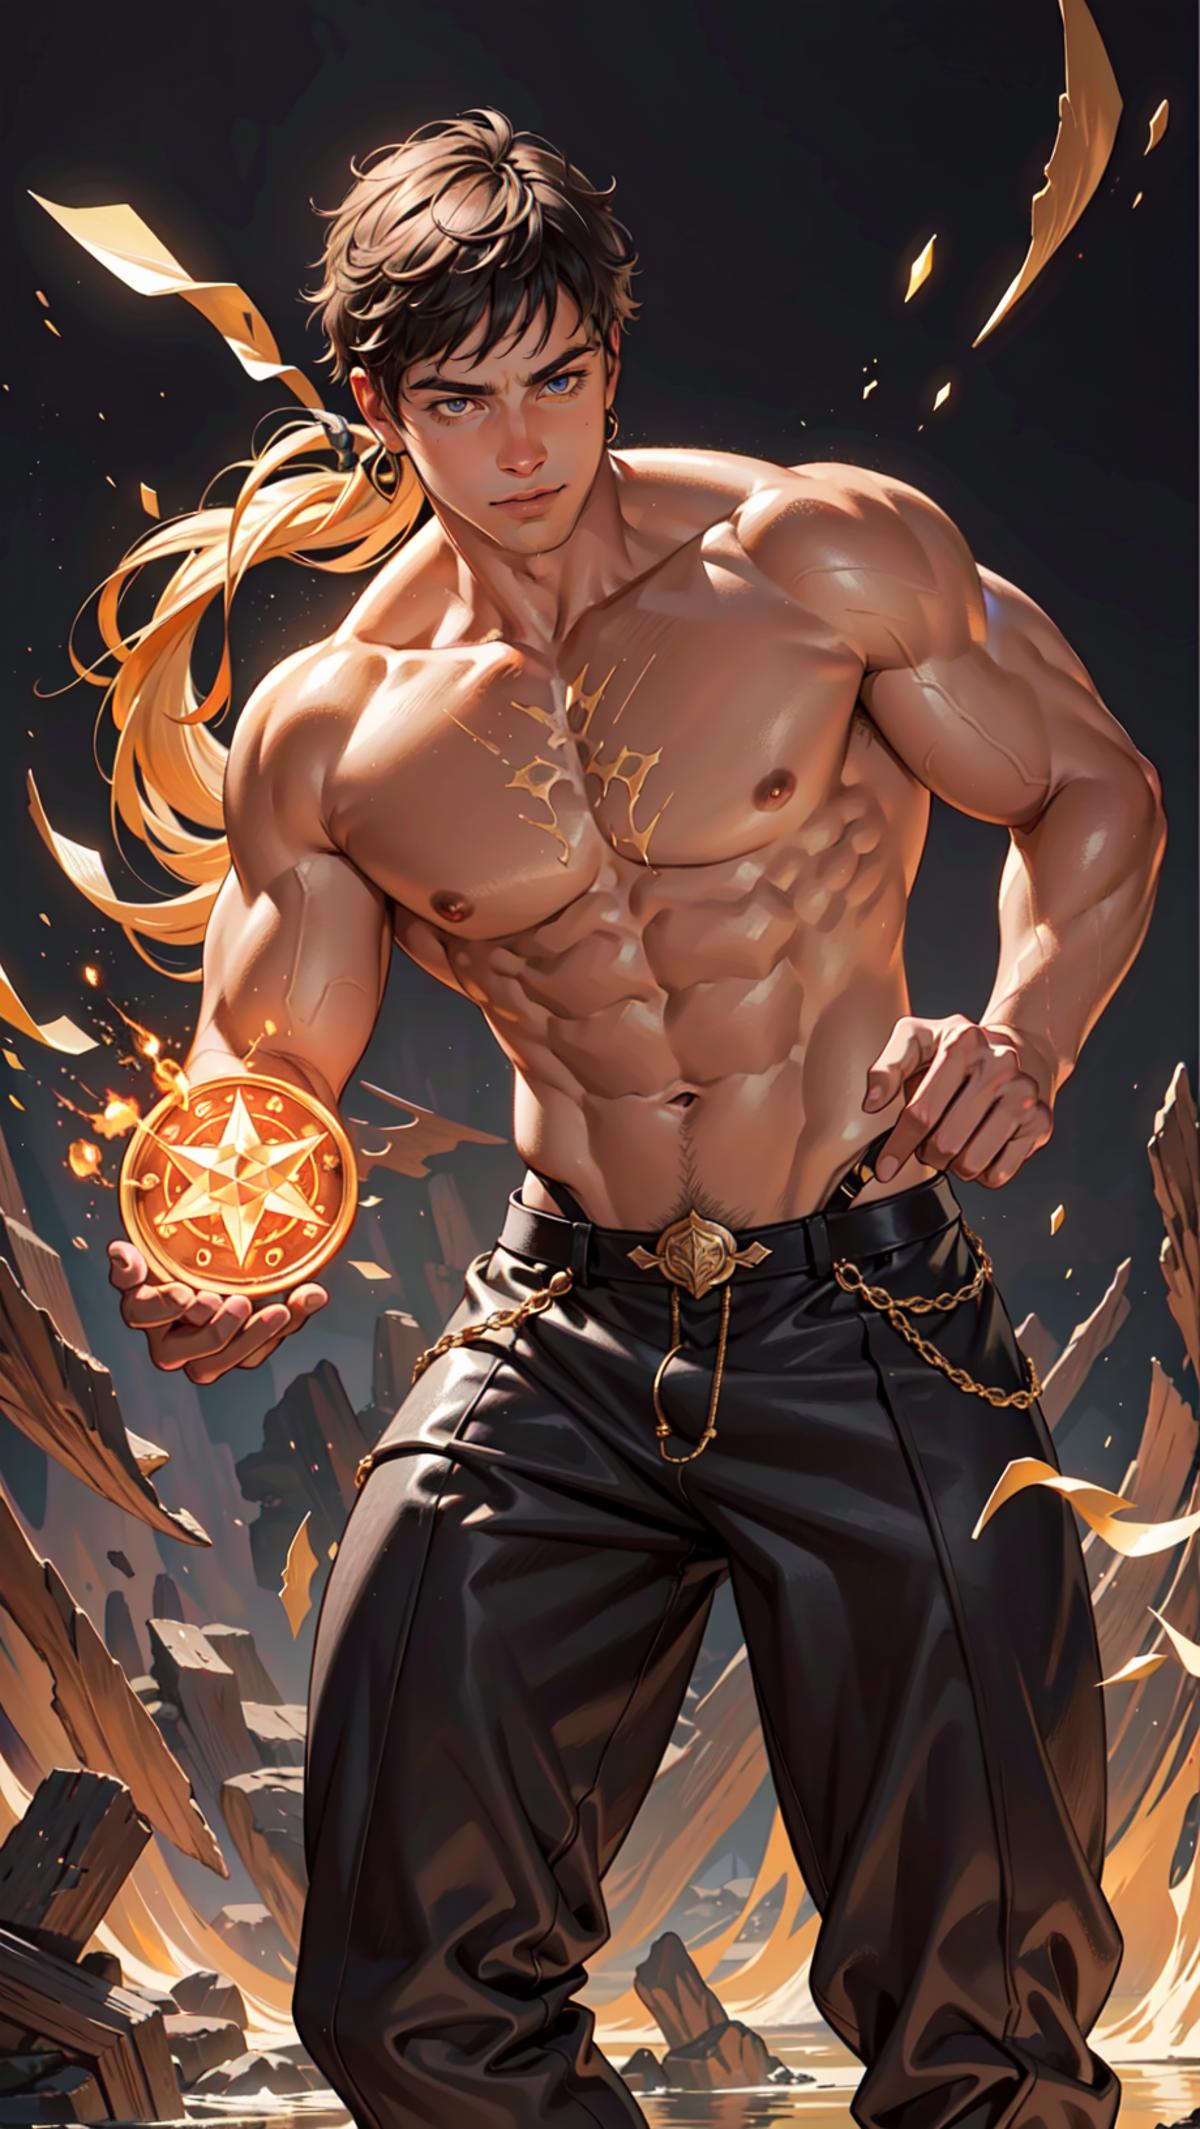 The Anime Man with a Star: A Muscular Shirtless Man Holding a Star in a Dark Setting